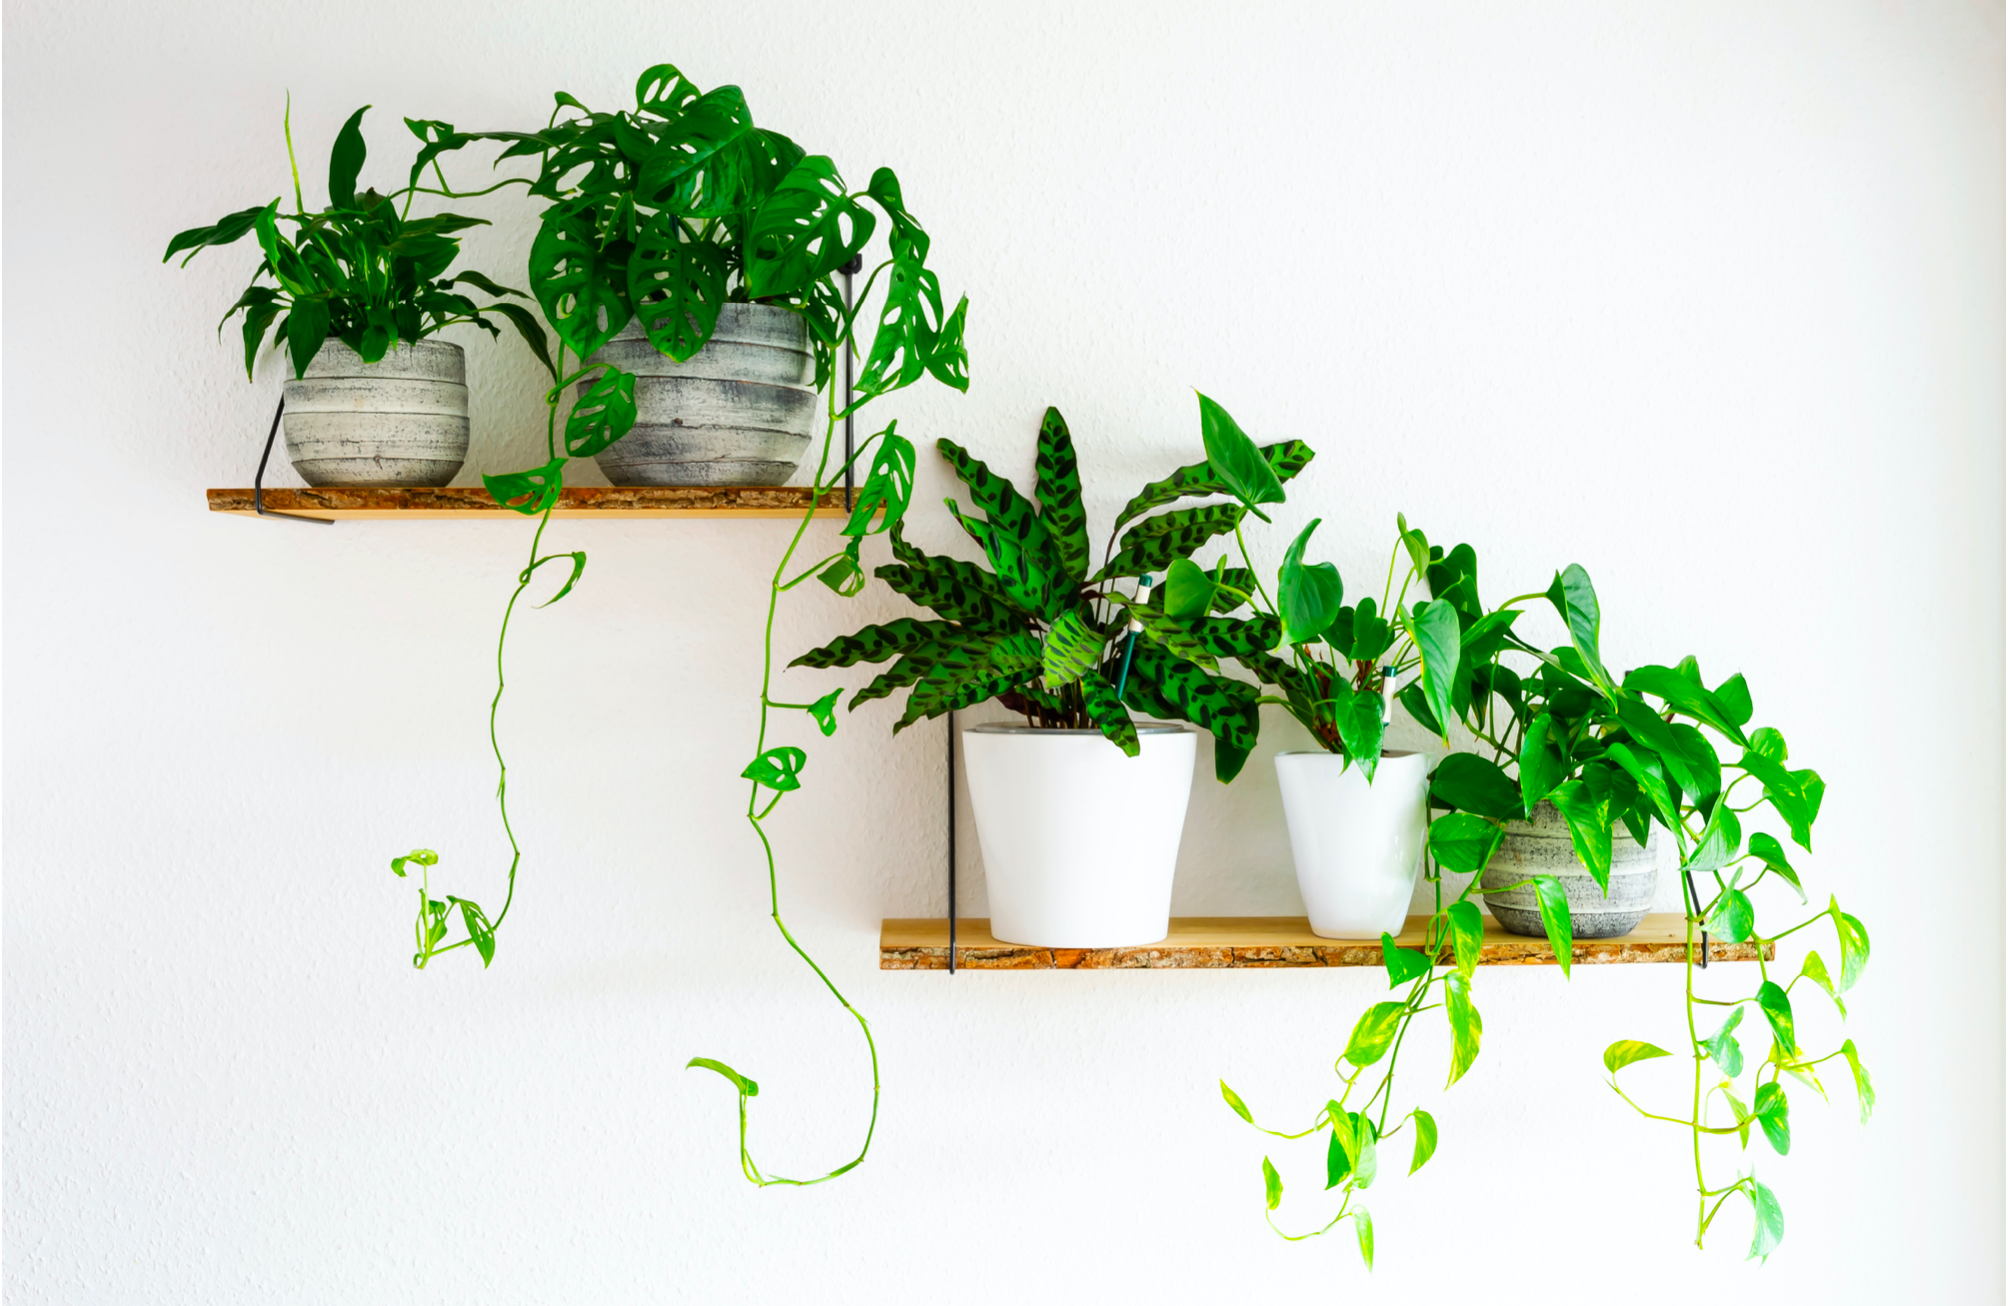 Placing plants on shelves are a great way of keeping toxic plants out of reach for your pets.